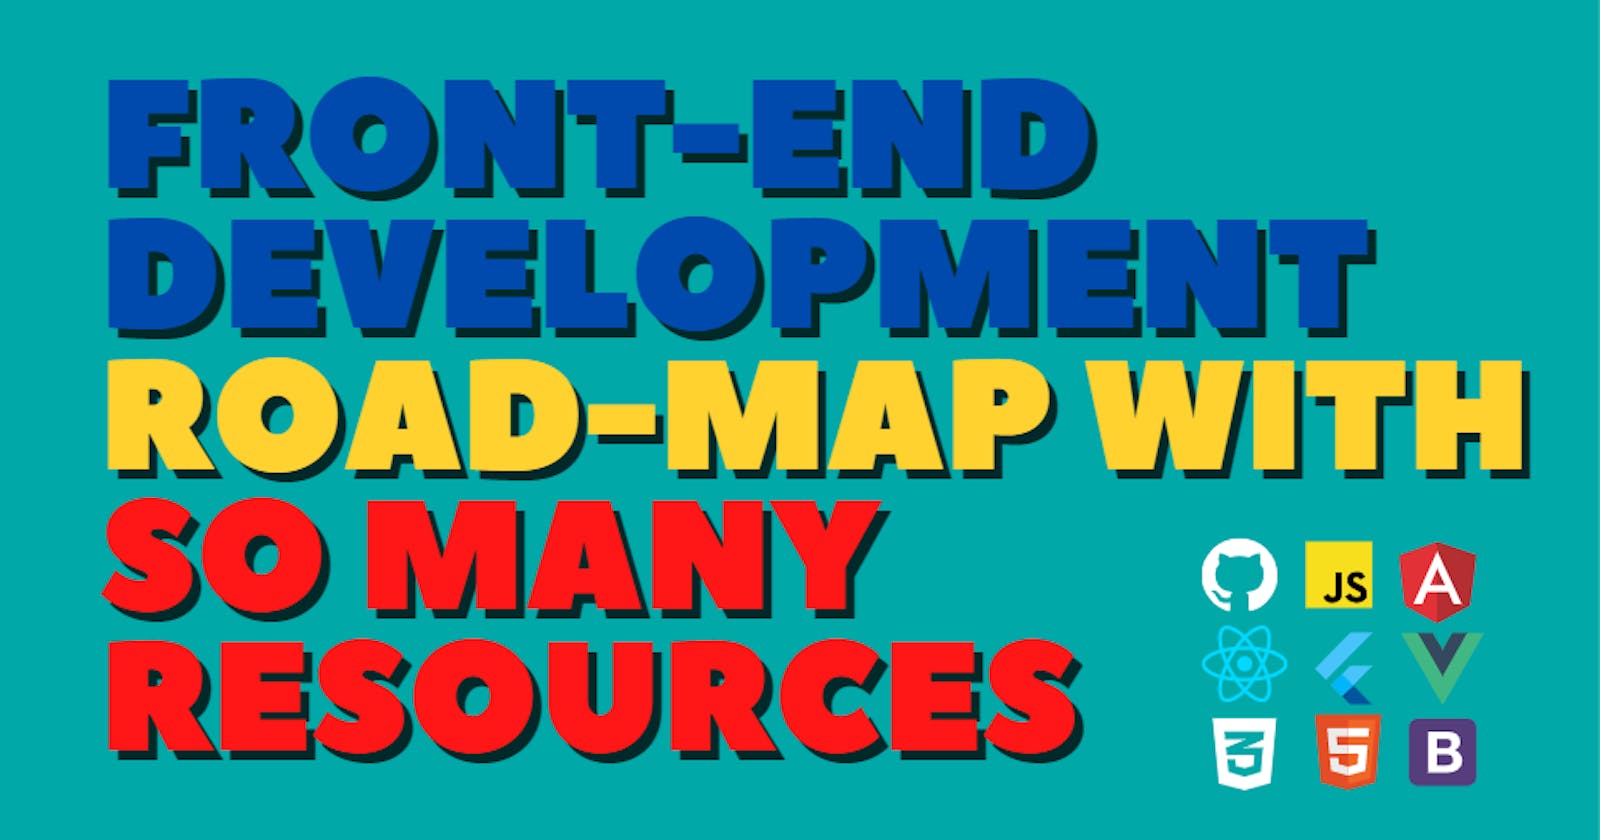 Ultimate RoadMap with so many resources for Front-End Development 💥💥